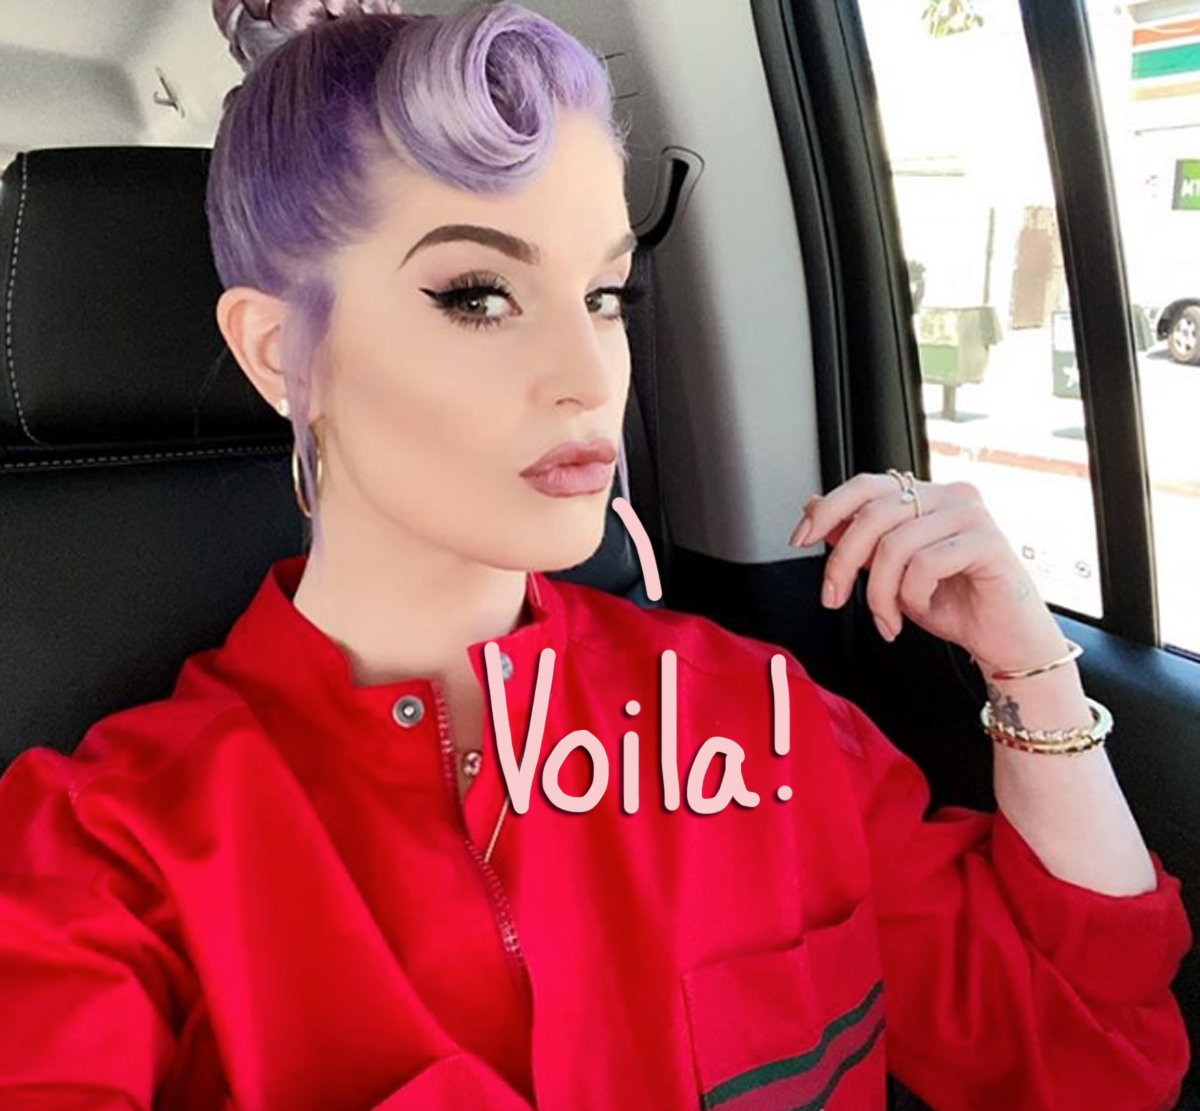 Kelly Osbourne Confirms Stunning 85 Lb Weight Loss During ... - 1200 x 1111 jpeg 498kB